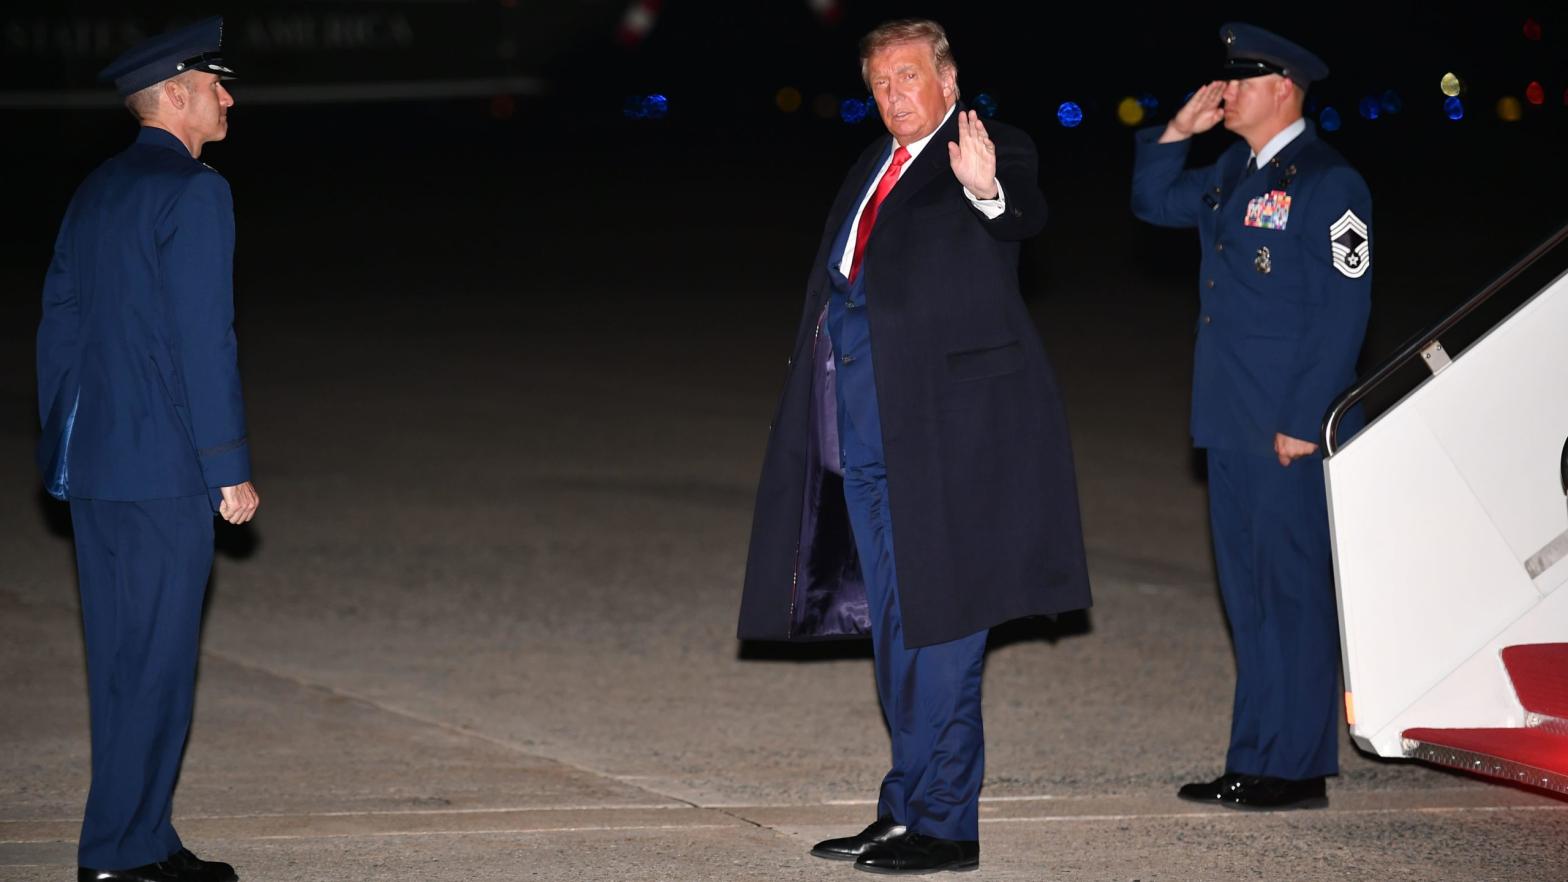 US President Donald Trump waves after stepping off Air Force One upon arrival at Andrews Air Force Base in Maryland on September 30, 2020.  (Photo: Mandel Ngan, Getty Images)